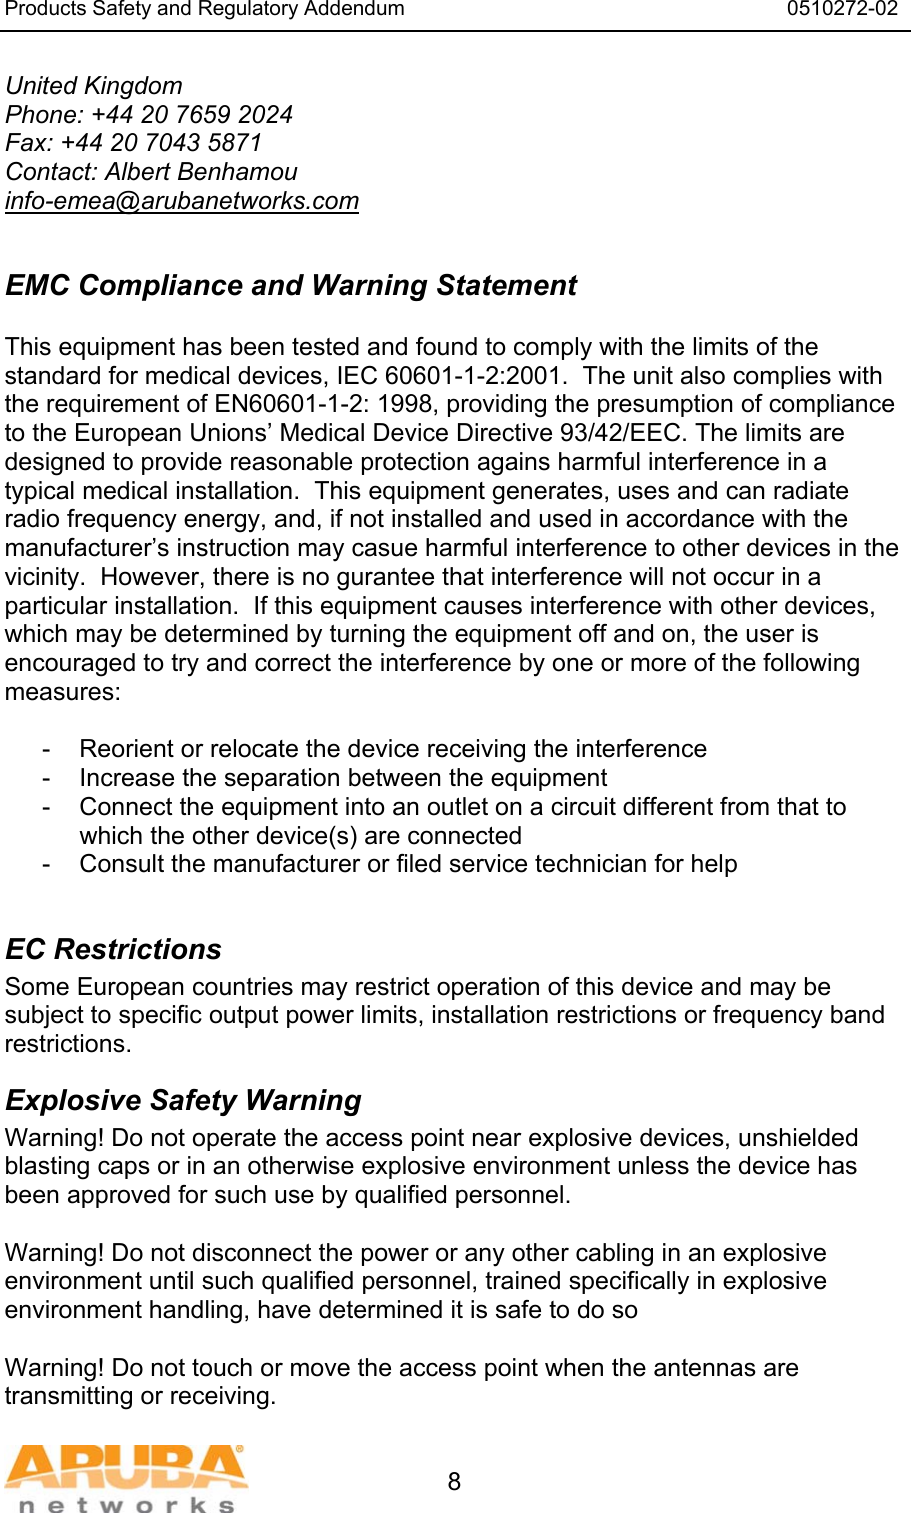 Products Safety and Regulatory Addendum                                                                  0510272-02   8 United Kingdom Phone: +44 20 7659 2024 Fax: +44 20 7043 5871 Contact: Albert Benhamou info-emea@arubanetworks.com  EMC Compliance and Warning Statement  This equipment has been tested and found to comply with the limits of the standard for medical devices, IEC 60601-1-2:2001.  The unit also complies with the requirement of EN60601-1-2: 1998, providing the presumption of compliance to the European Unions’ Medical Device Directive 93/42/EEC. The limits are designed to provide reasonable protection agains harmful interference in a typical medical installation.  This equipment generates, uses and can radiate radio frequency energy, and, if not installed and used in accordance with the manufacturer’s instruction may casue harmful interference to other devices in the vicinity.  However, there is no gurantee that interference will not occur in a particular installation.  If this equipment causes interference with other devices, which may be determined by turning the equipment off and on, the user is encouraged to try and correct the interference by one or more of the following measures:  -  Reorient or relocate the device receiving the interference -  Increase the separation between the equipment -  Connect the equipment into an outlet on a circuit different from that to which the other device(s) are connected -  Consult the manufacturer or filed service technician for help  EC Restrictions Some European countries may restrict operation of this device and may be subject to specific output power limits, installation restrictions or frequency band restrictions. Explosive Safety Warning Warning! Do not operate the access point near explosive devices, unshielded blasting caps or in an otherwise explosive environment unless the device has been approved for such use by qualified personnel.  Warning! Do not disconnect the power or any other cabling in an explosive environment until such qualified personnel, trained specifically in explosive environment handling, have determined it is safe to do so  Warning! Do not touch or move the access point when the antennas are transmitting or receiving. 